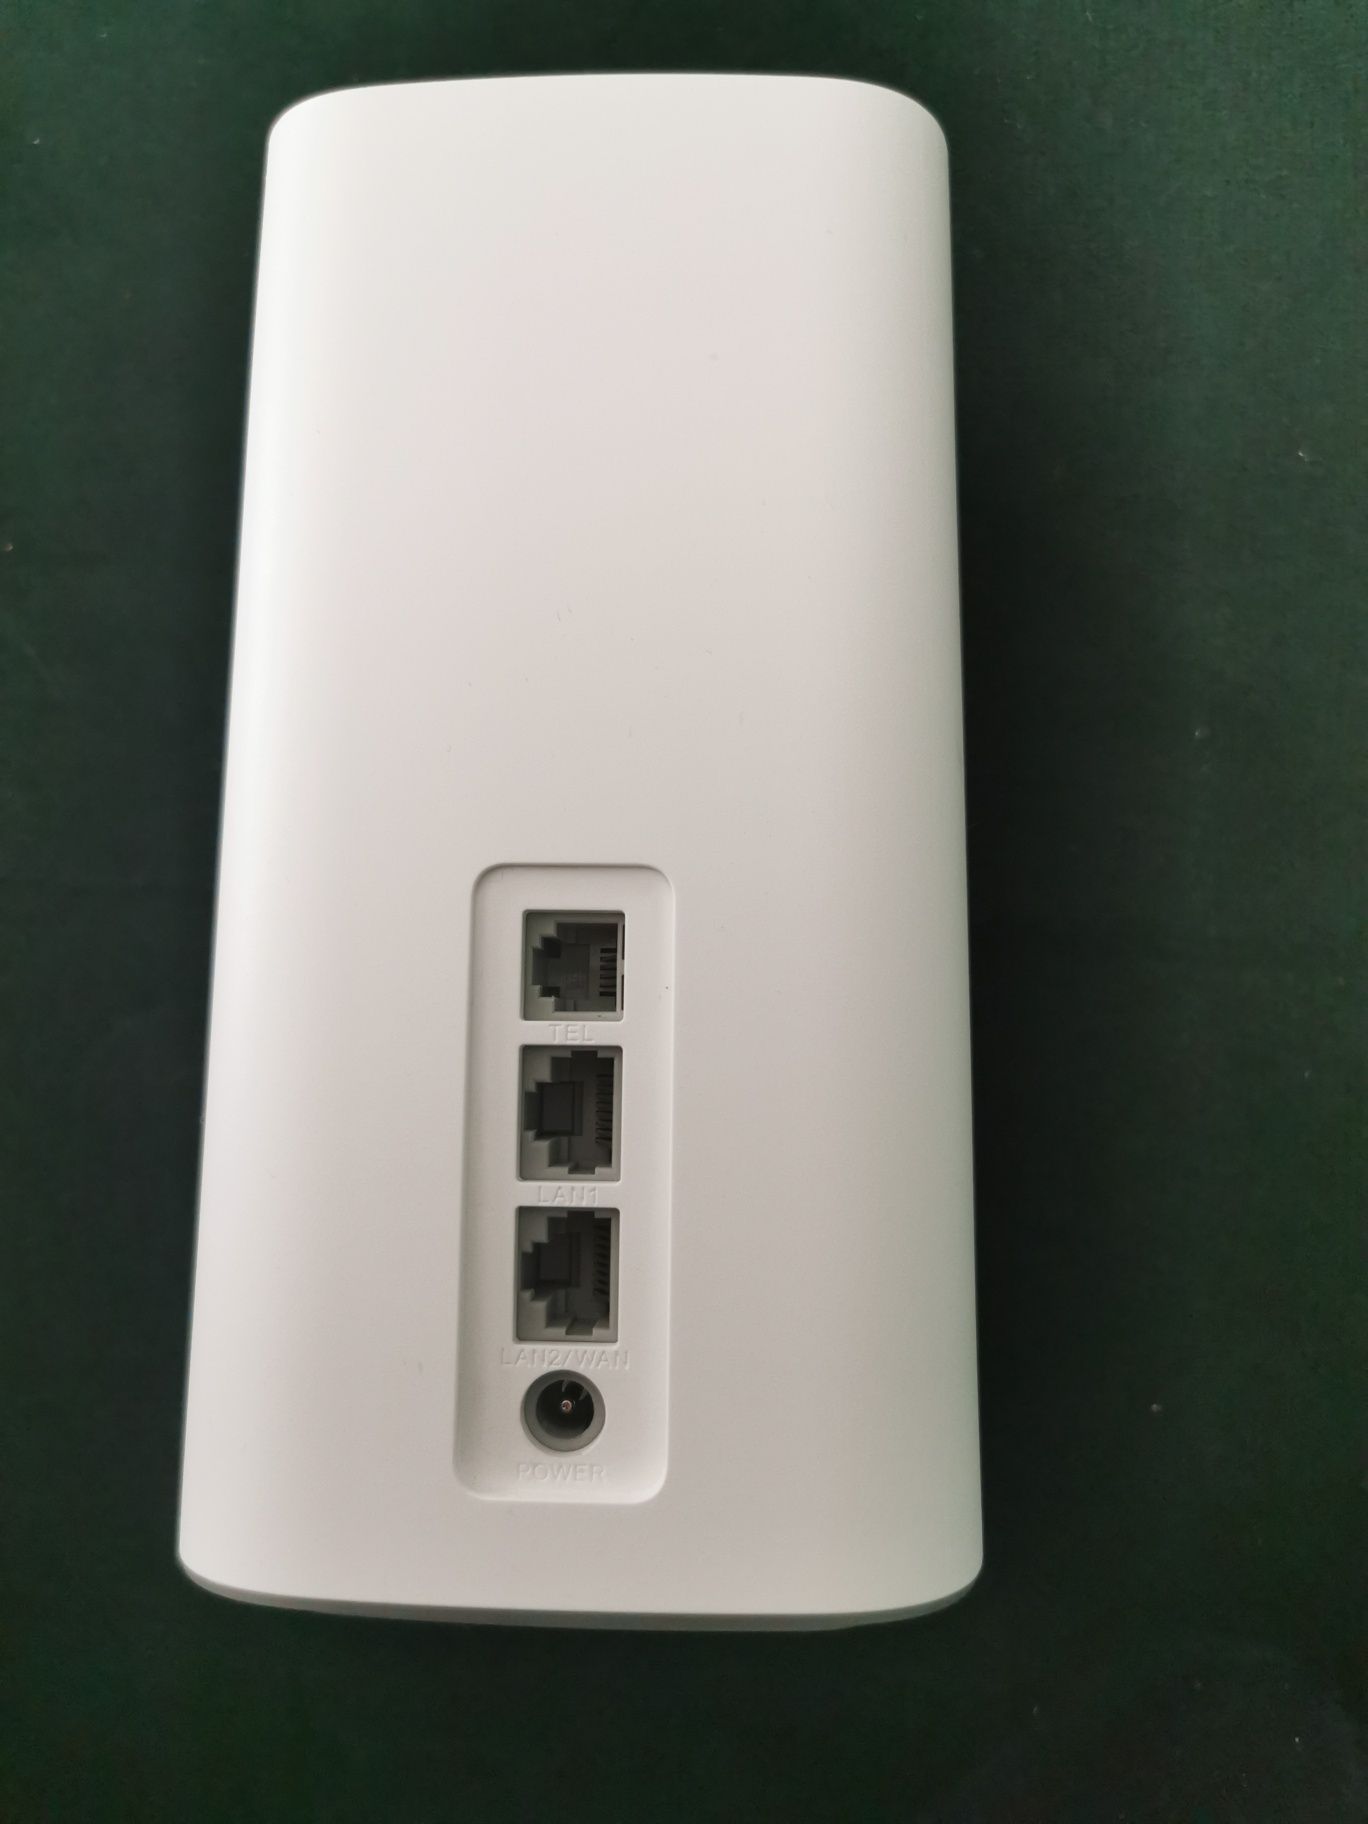 Router Huawei model H122-373